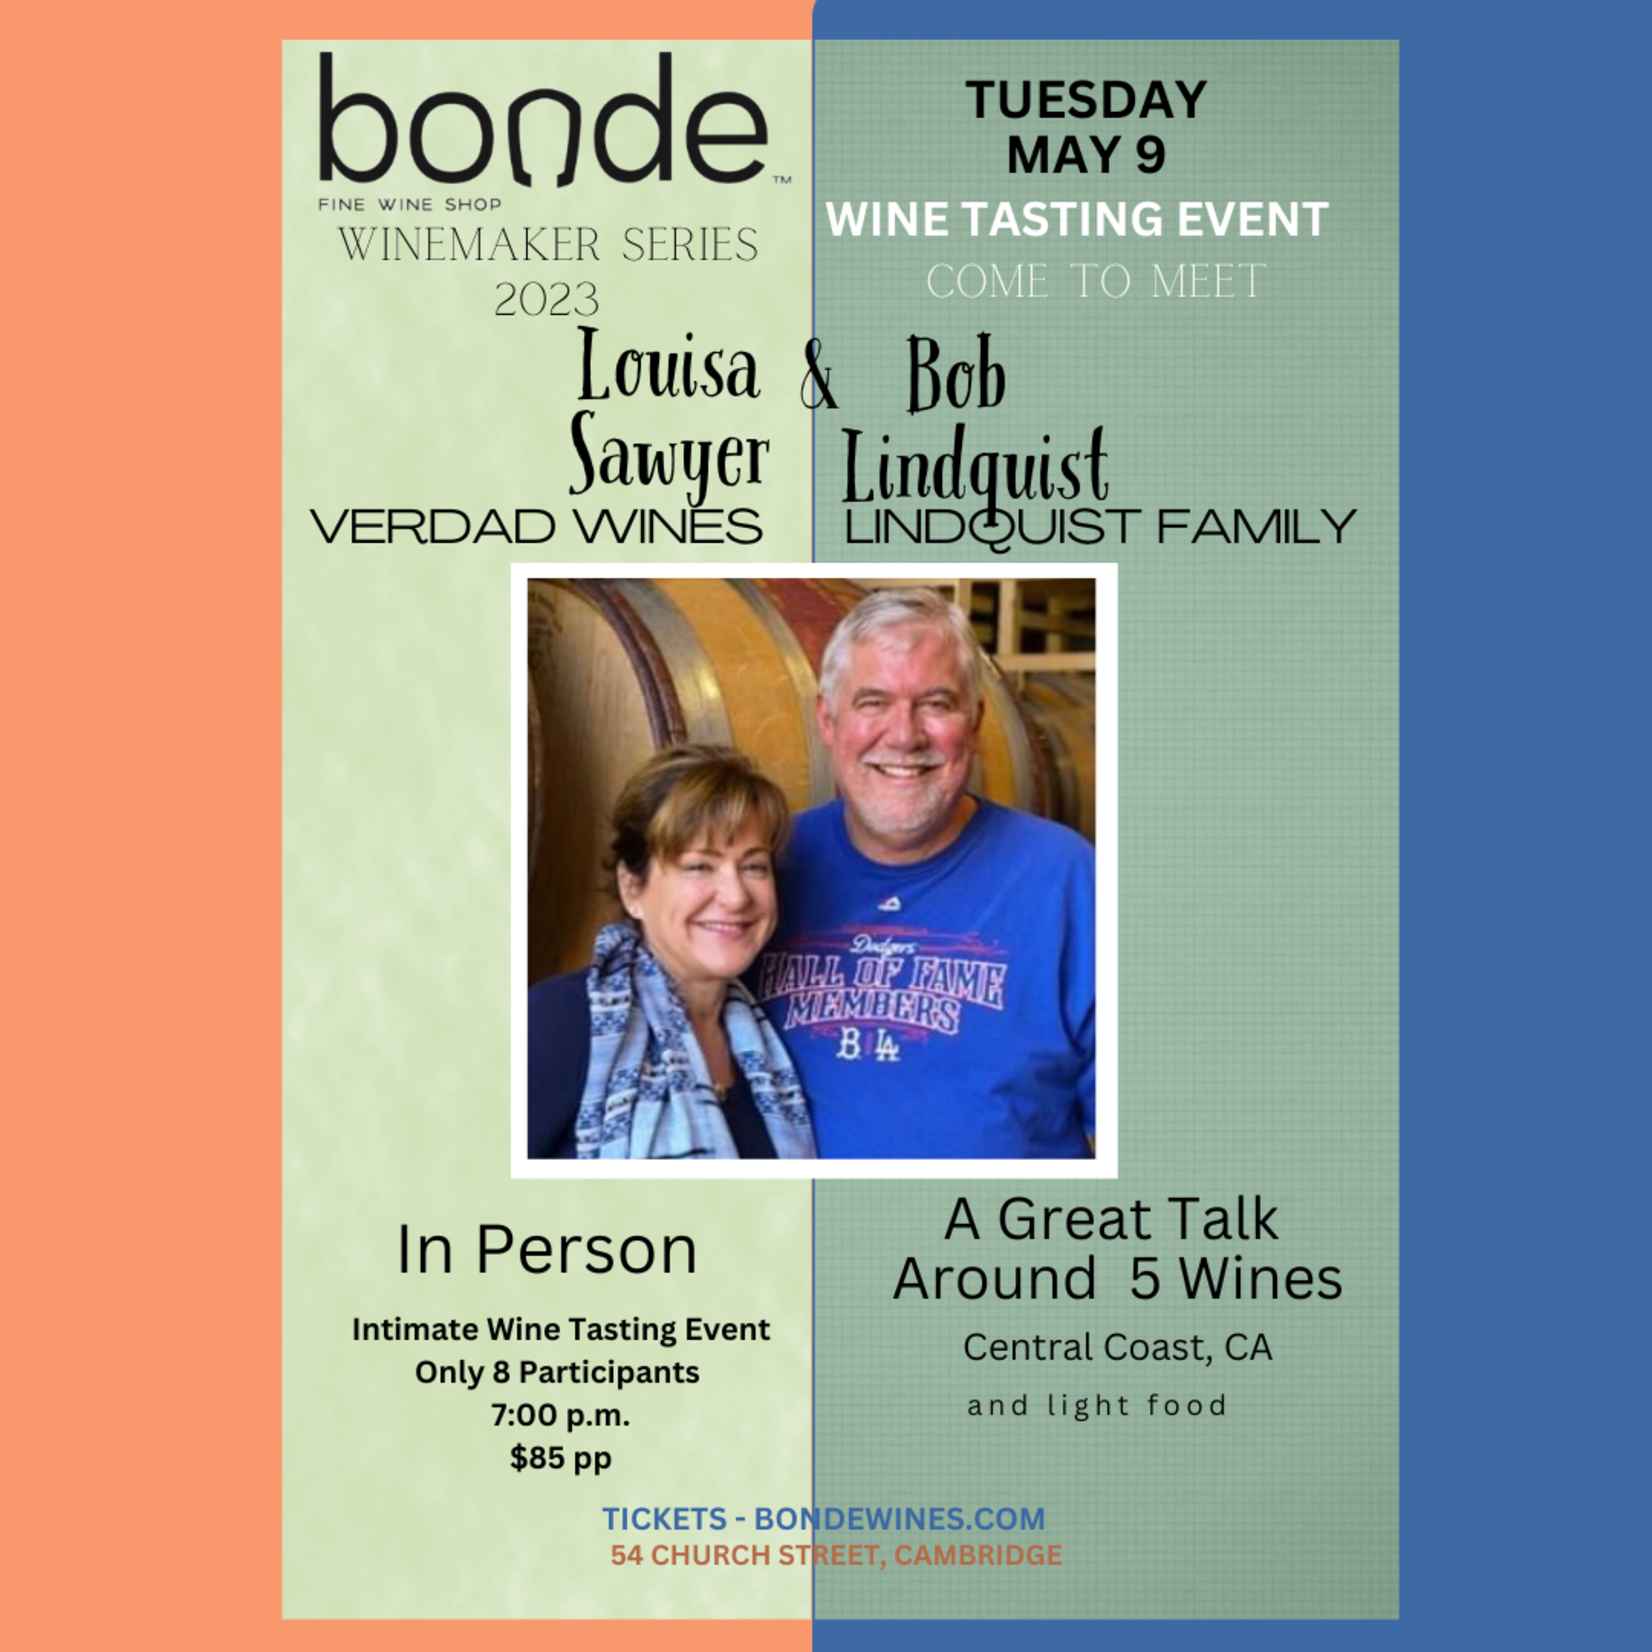 Meet the Wine Makers: Bob & Louisa of Lindquist Family & Verdad Wines - Wine Tasting & Class - Tuesday, May 9, 7:00 p.m.